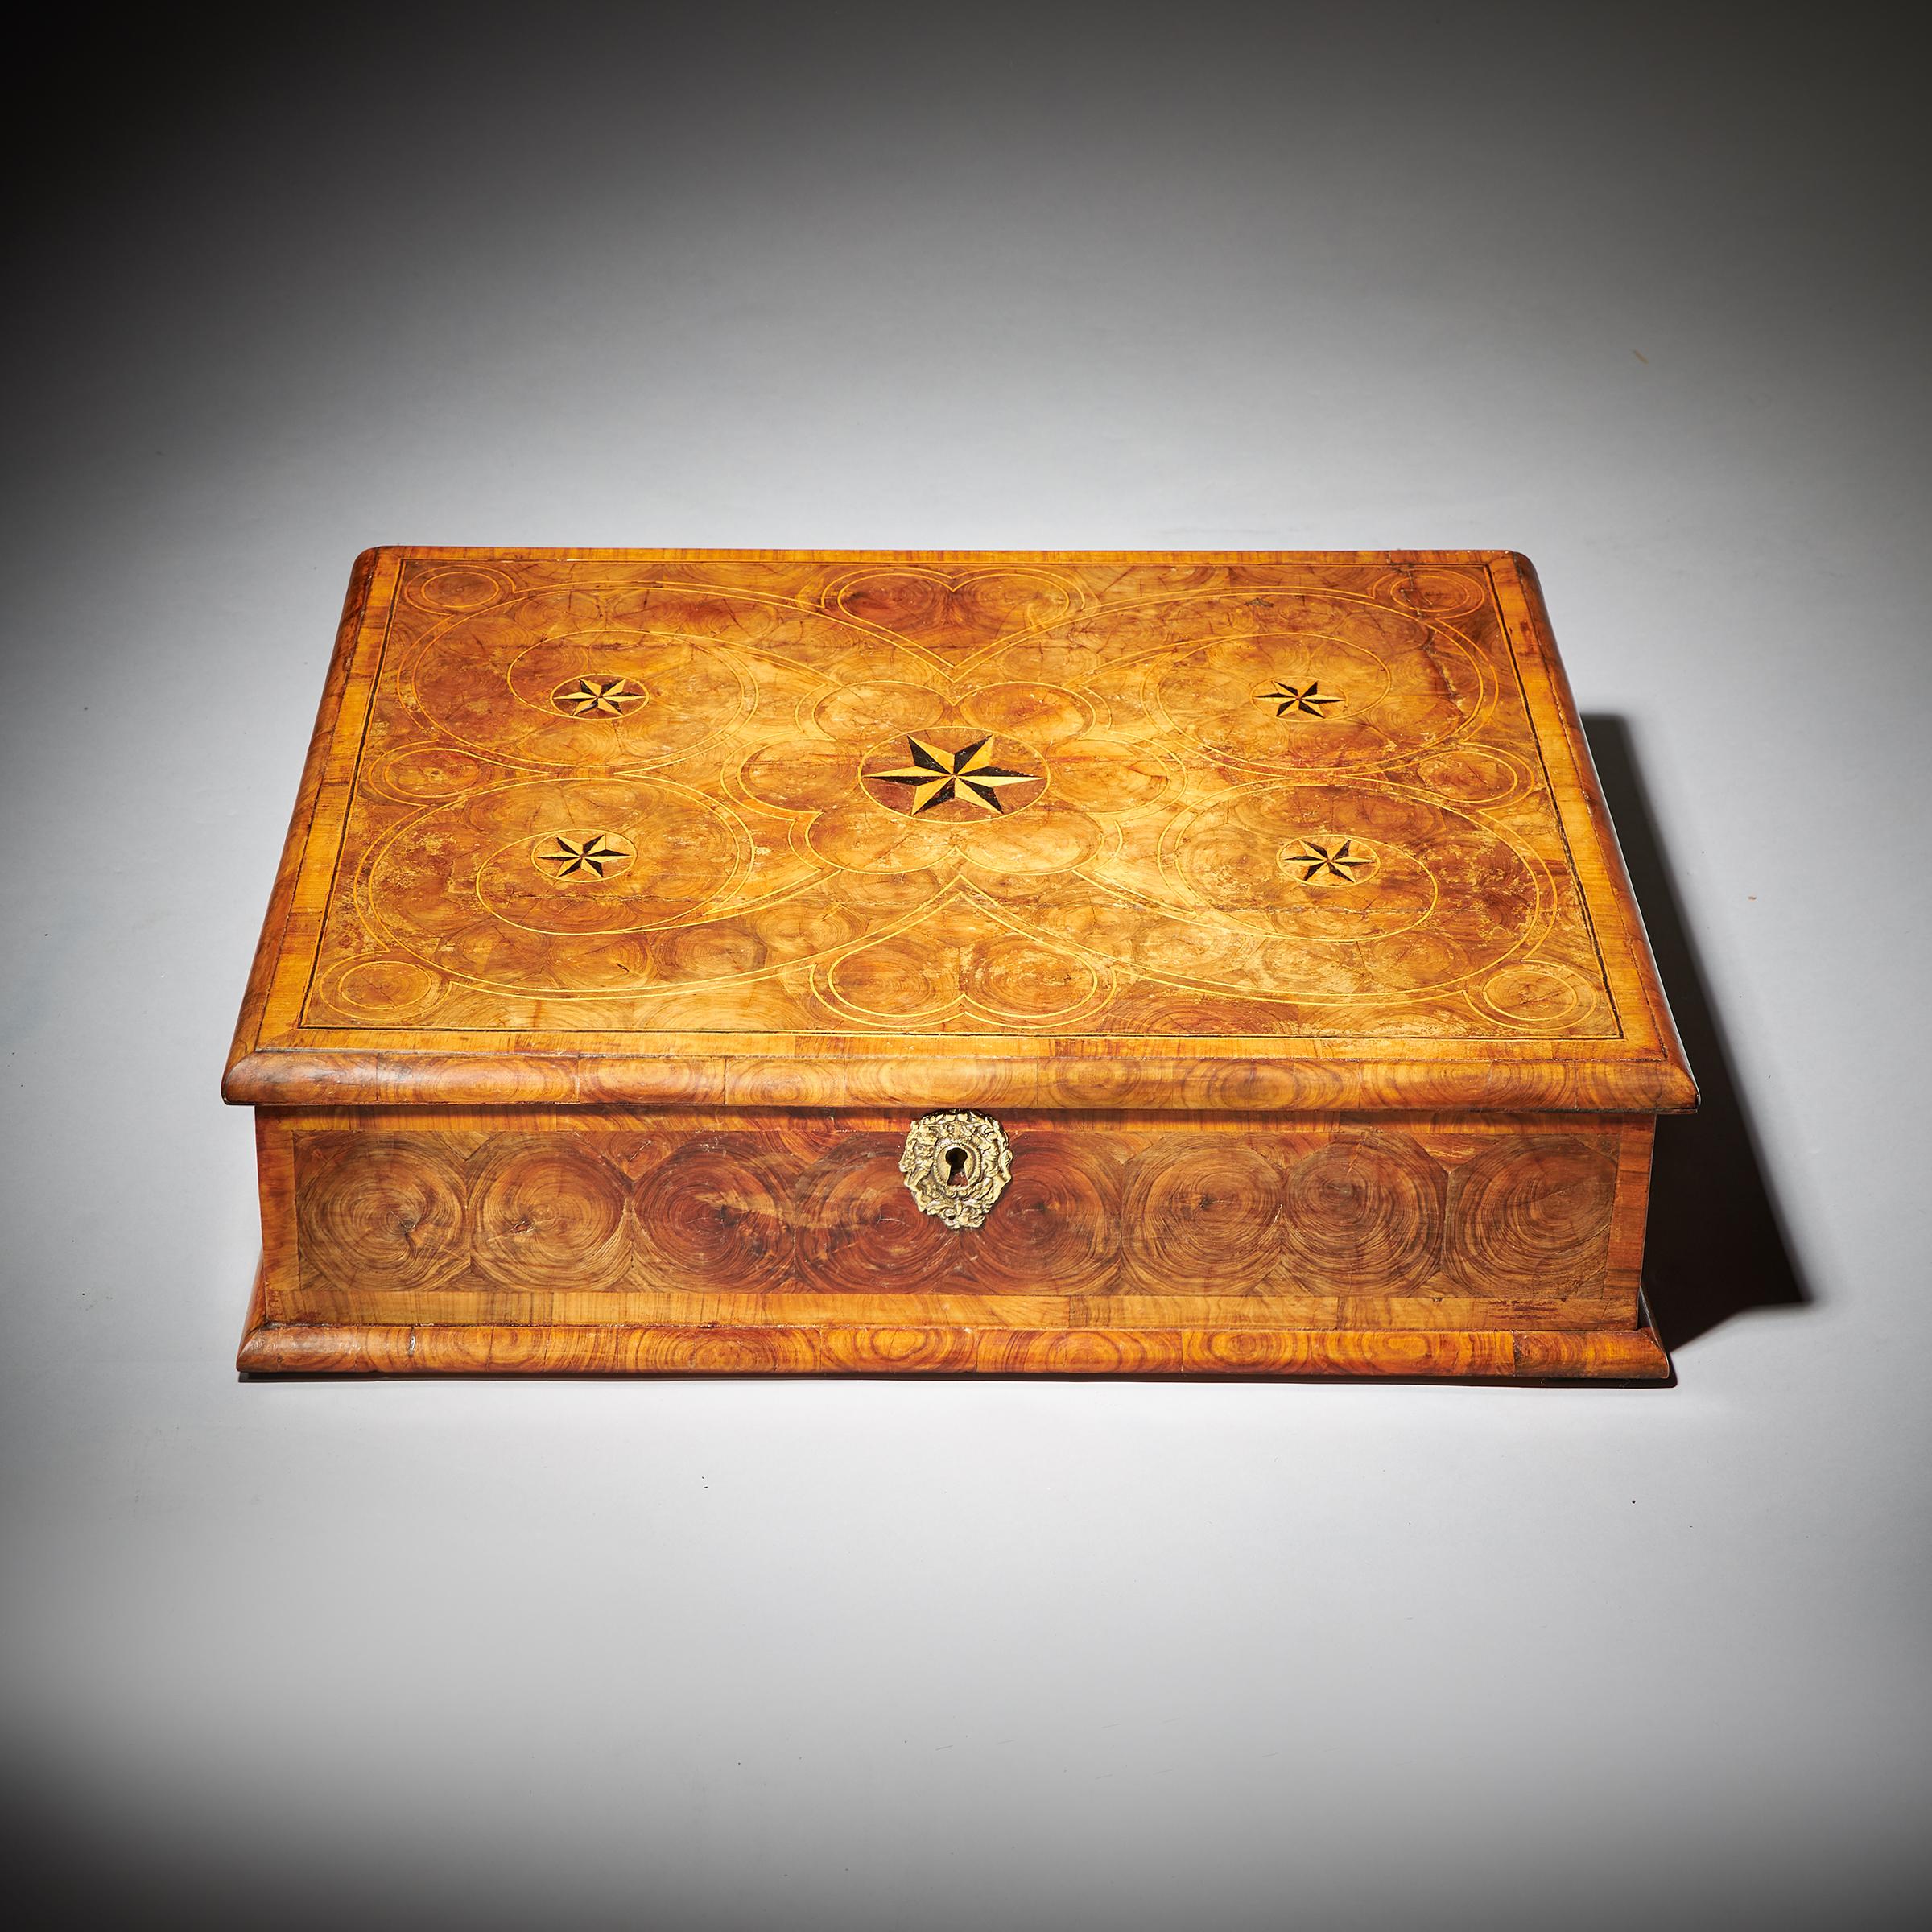 A fine and rare large parquetry inlaid 17th-century William and Mary period olive oyster lace box. 1680-1700, England

The cross-grain moulded top is entirely covered in well-placed oyster of olive in geometric patterns, inlaid with a parquetry